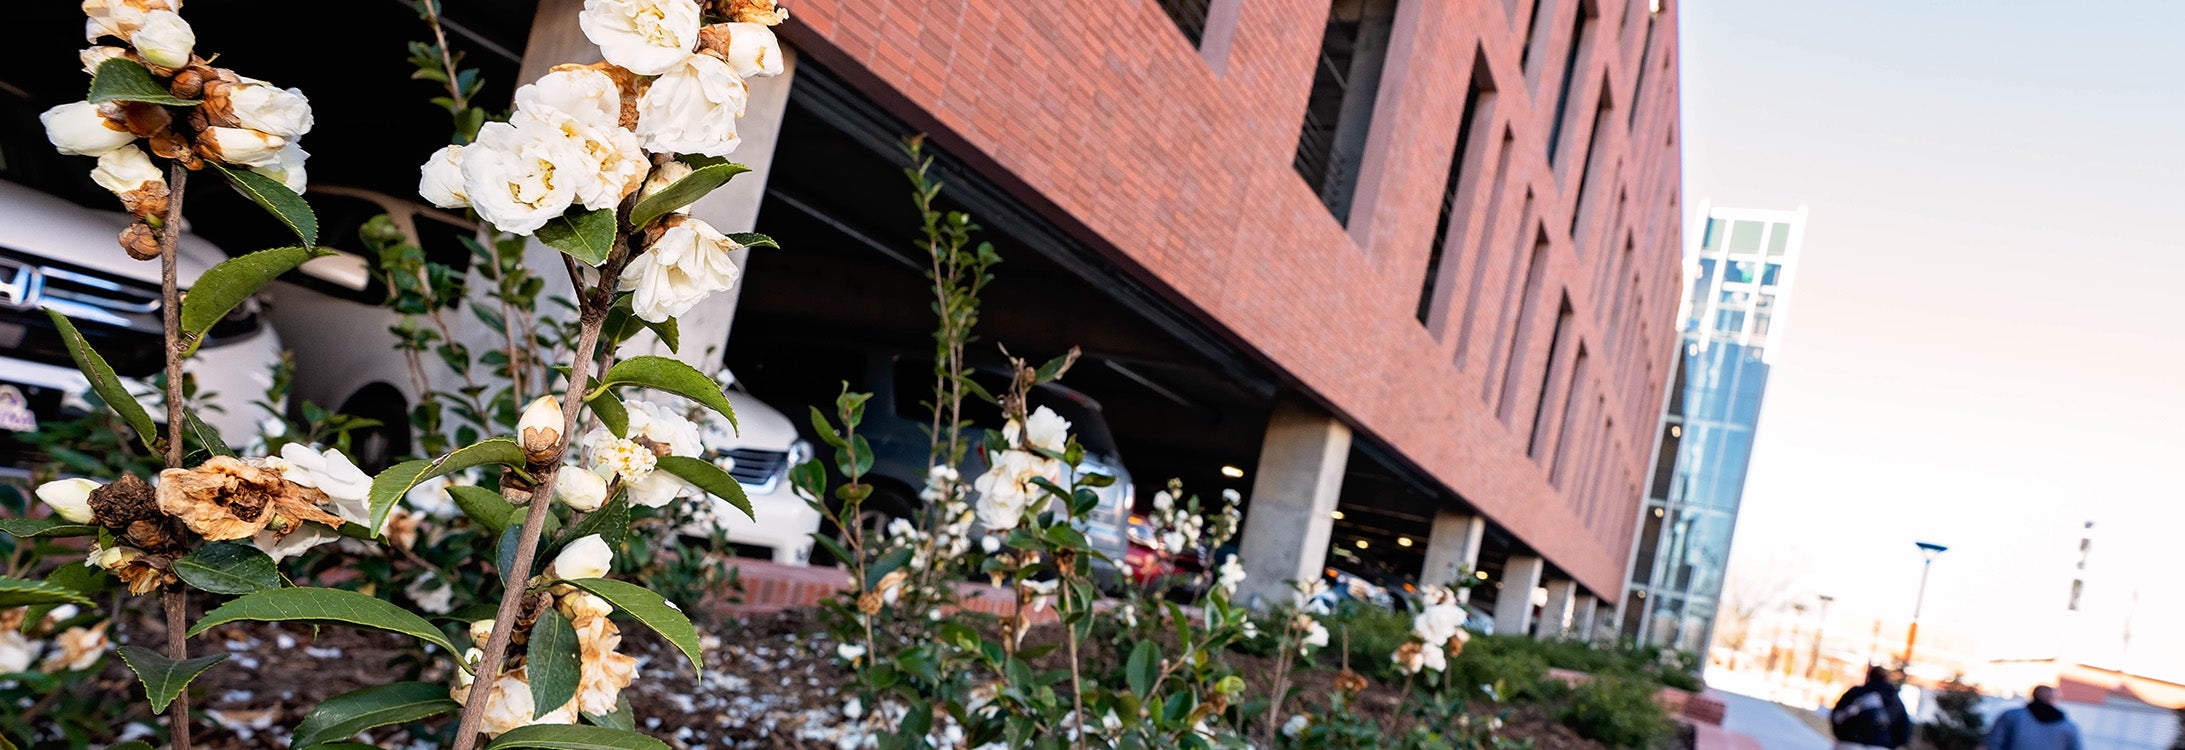 Camellias bloom outside the new ECU student center and parking deck. They’re part of the year-round landscape design at the new facilities.